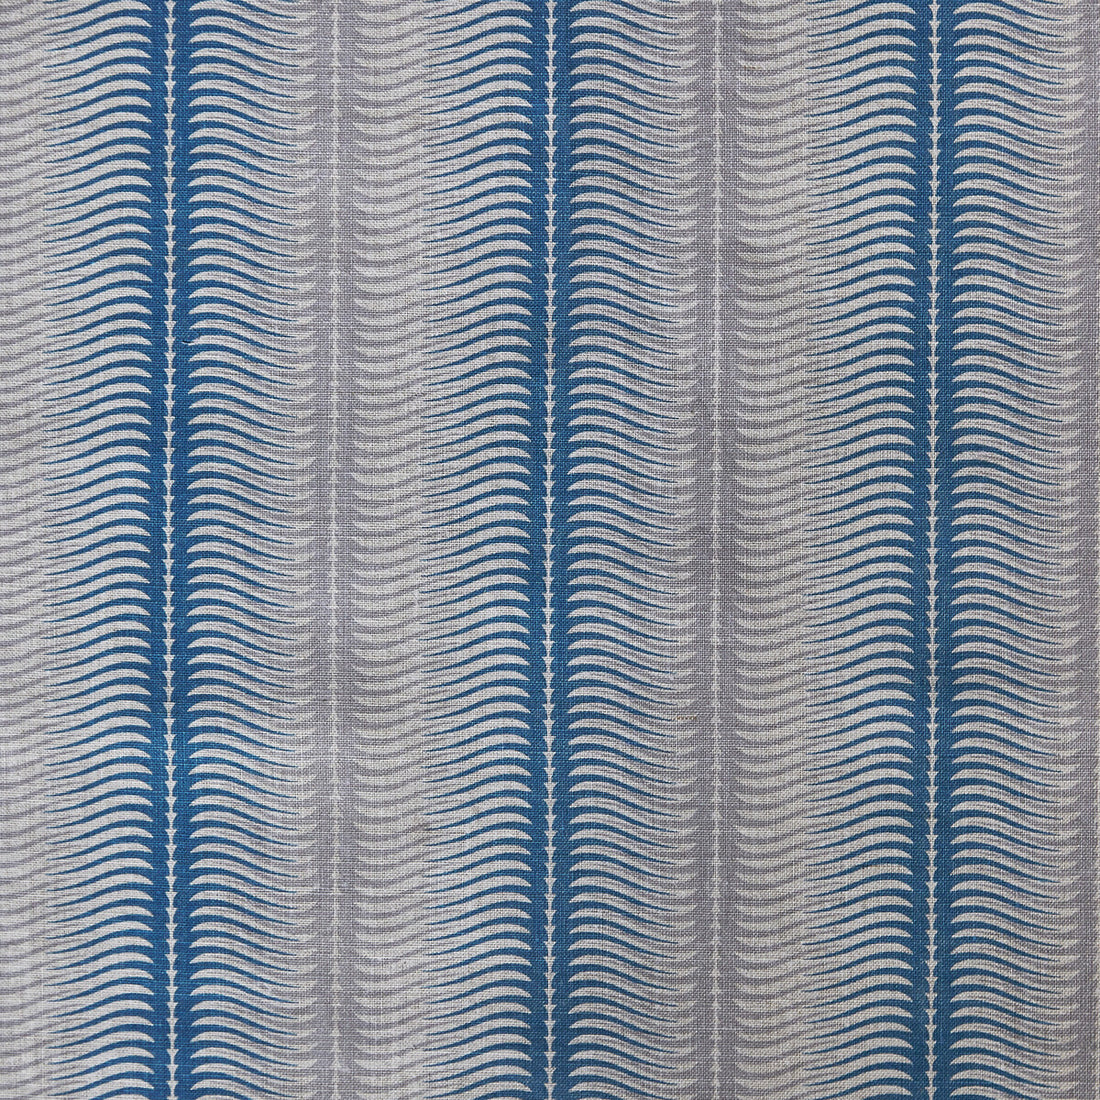 Stripes fabric in cornflower color - pattern GWF-3509.5.0 - by Lee Jofa Modern in the Allegra Hicks Garden collection